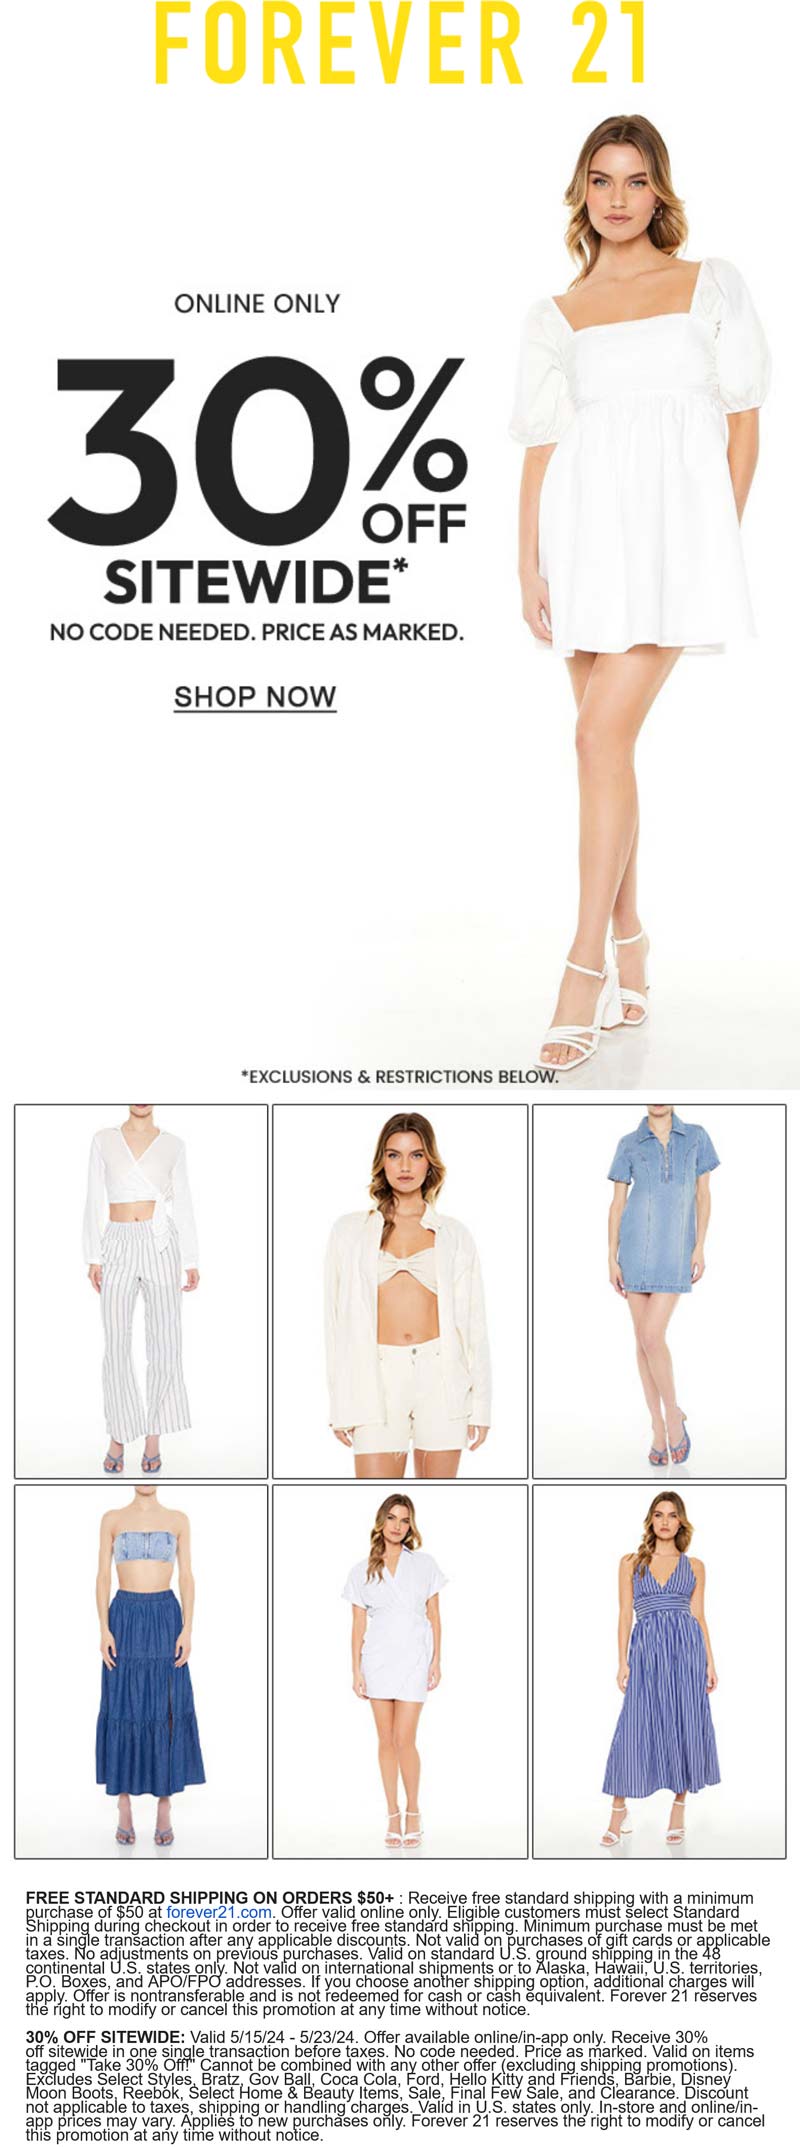 Forever 21 stores Coupon  30% off everything online at Forever 21 #forever21 